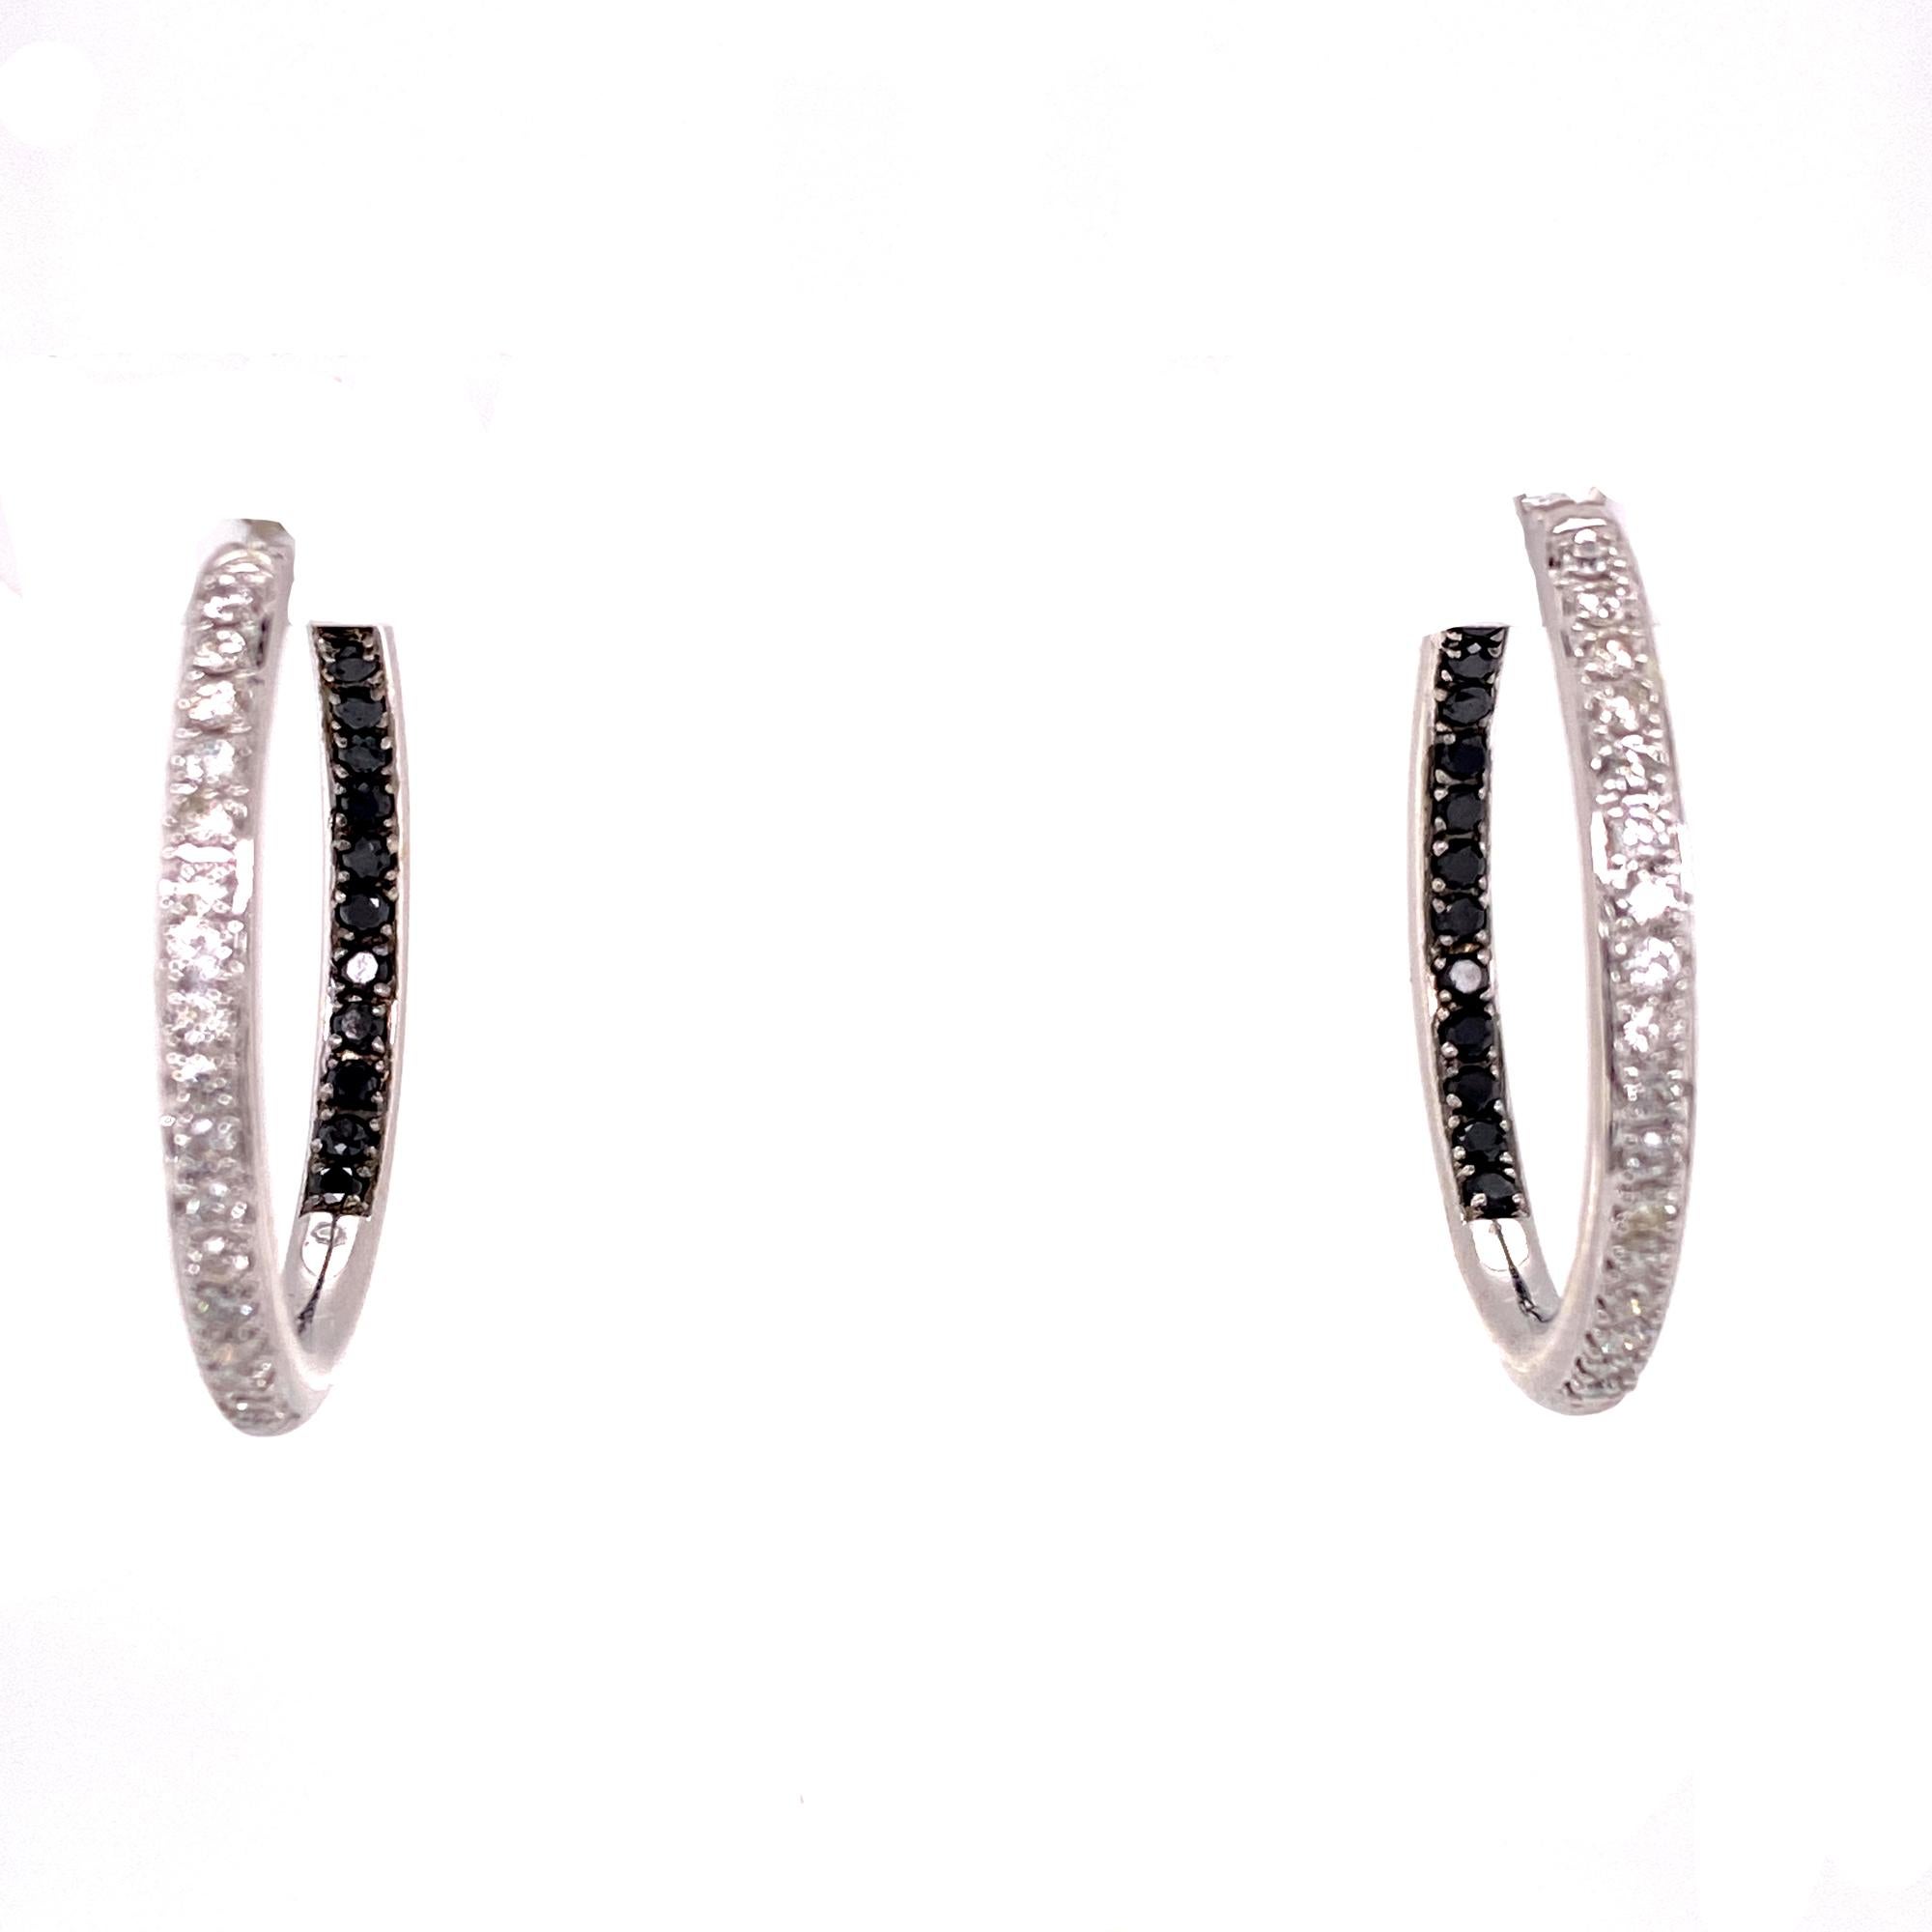 Great everyday light diamond hoop earrings. The in and out hoops feature round brilliant cut white diamonds on the front side and round brilliant cut black diamonds on the inside back for a total of 1.20 carat total weight. The in/out feature allows